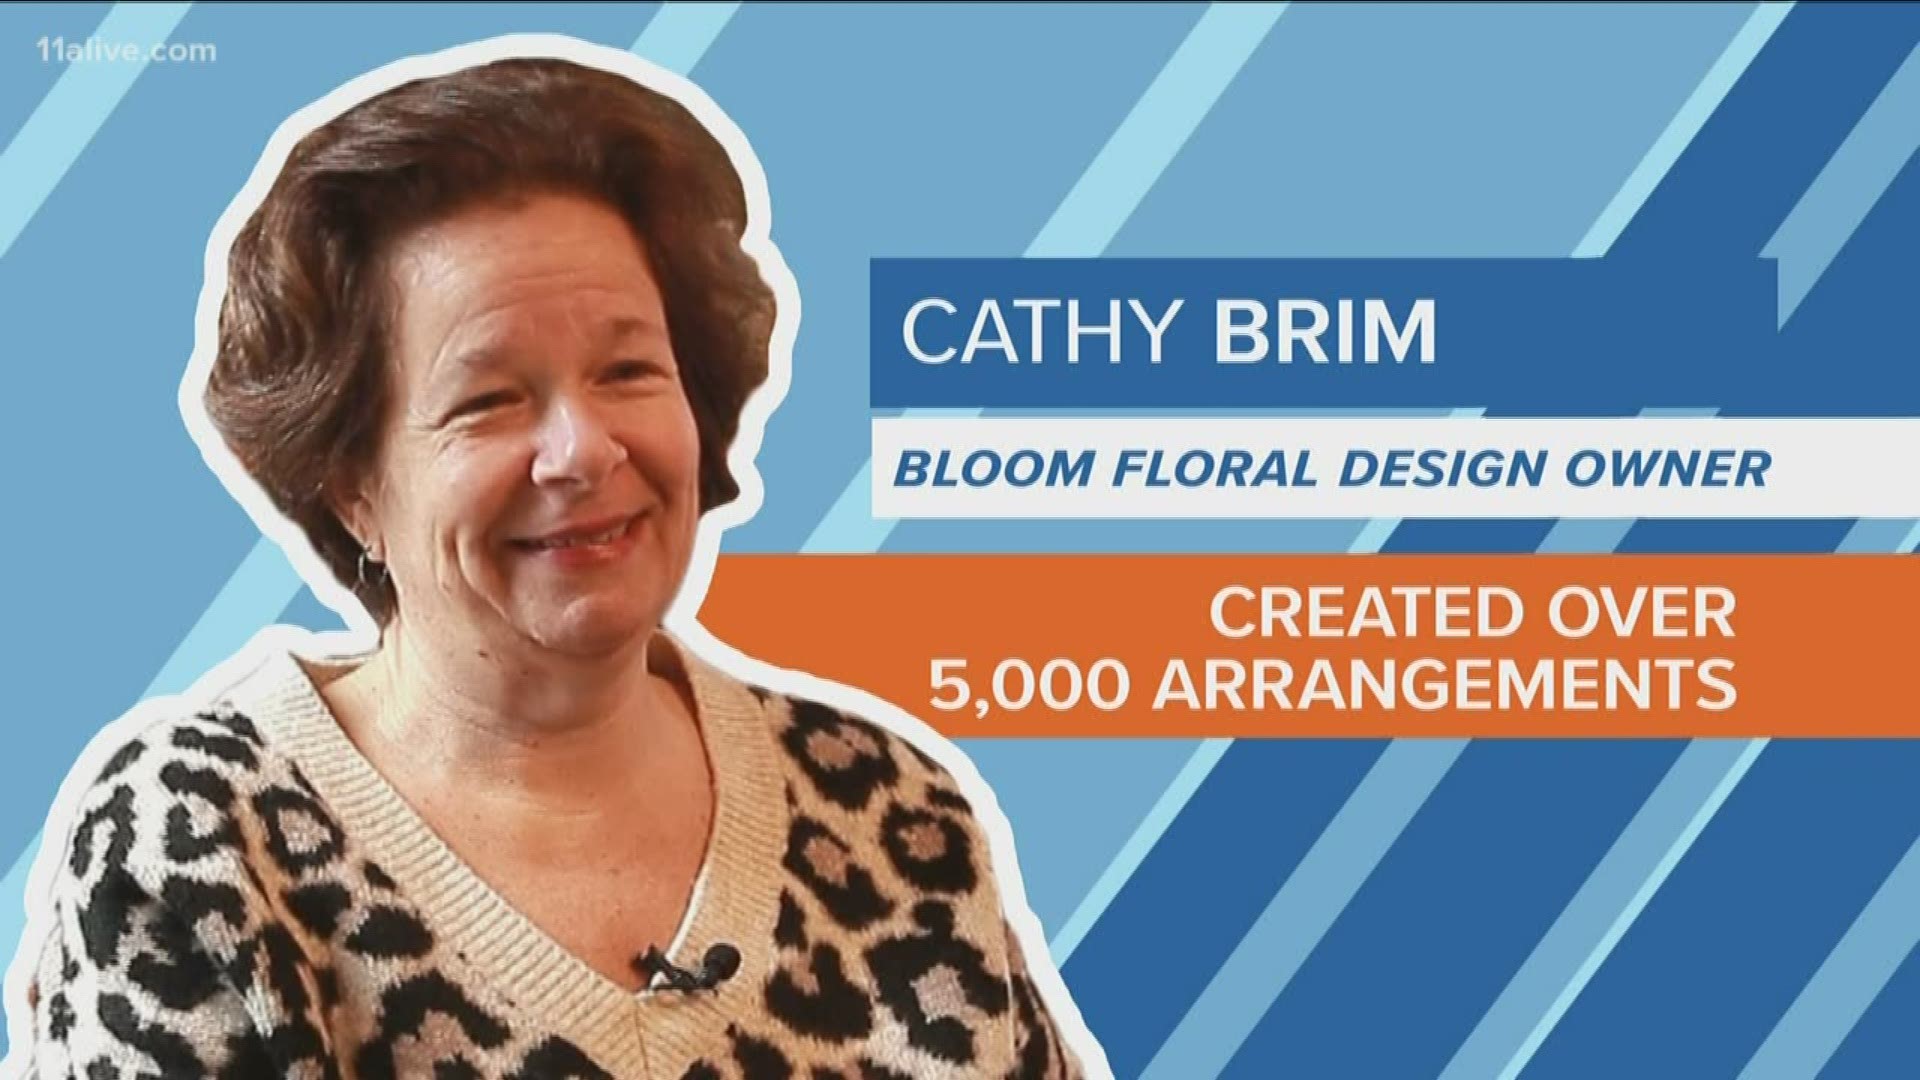 Cathy Brim of Bloom Floral Design shares her pro tips for getting the most bang for your buck buying Valentine's flowers.